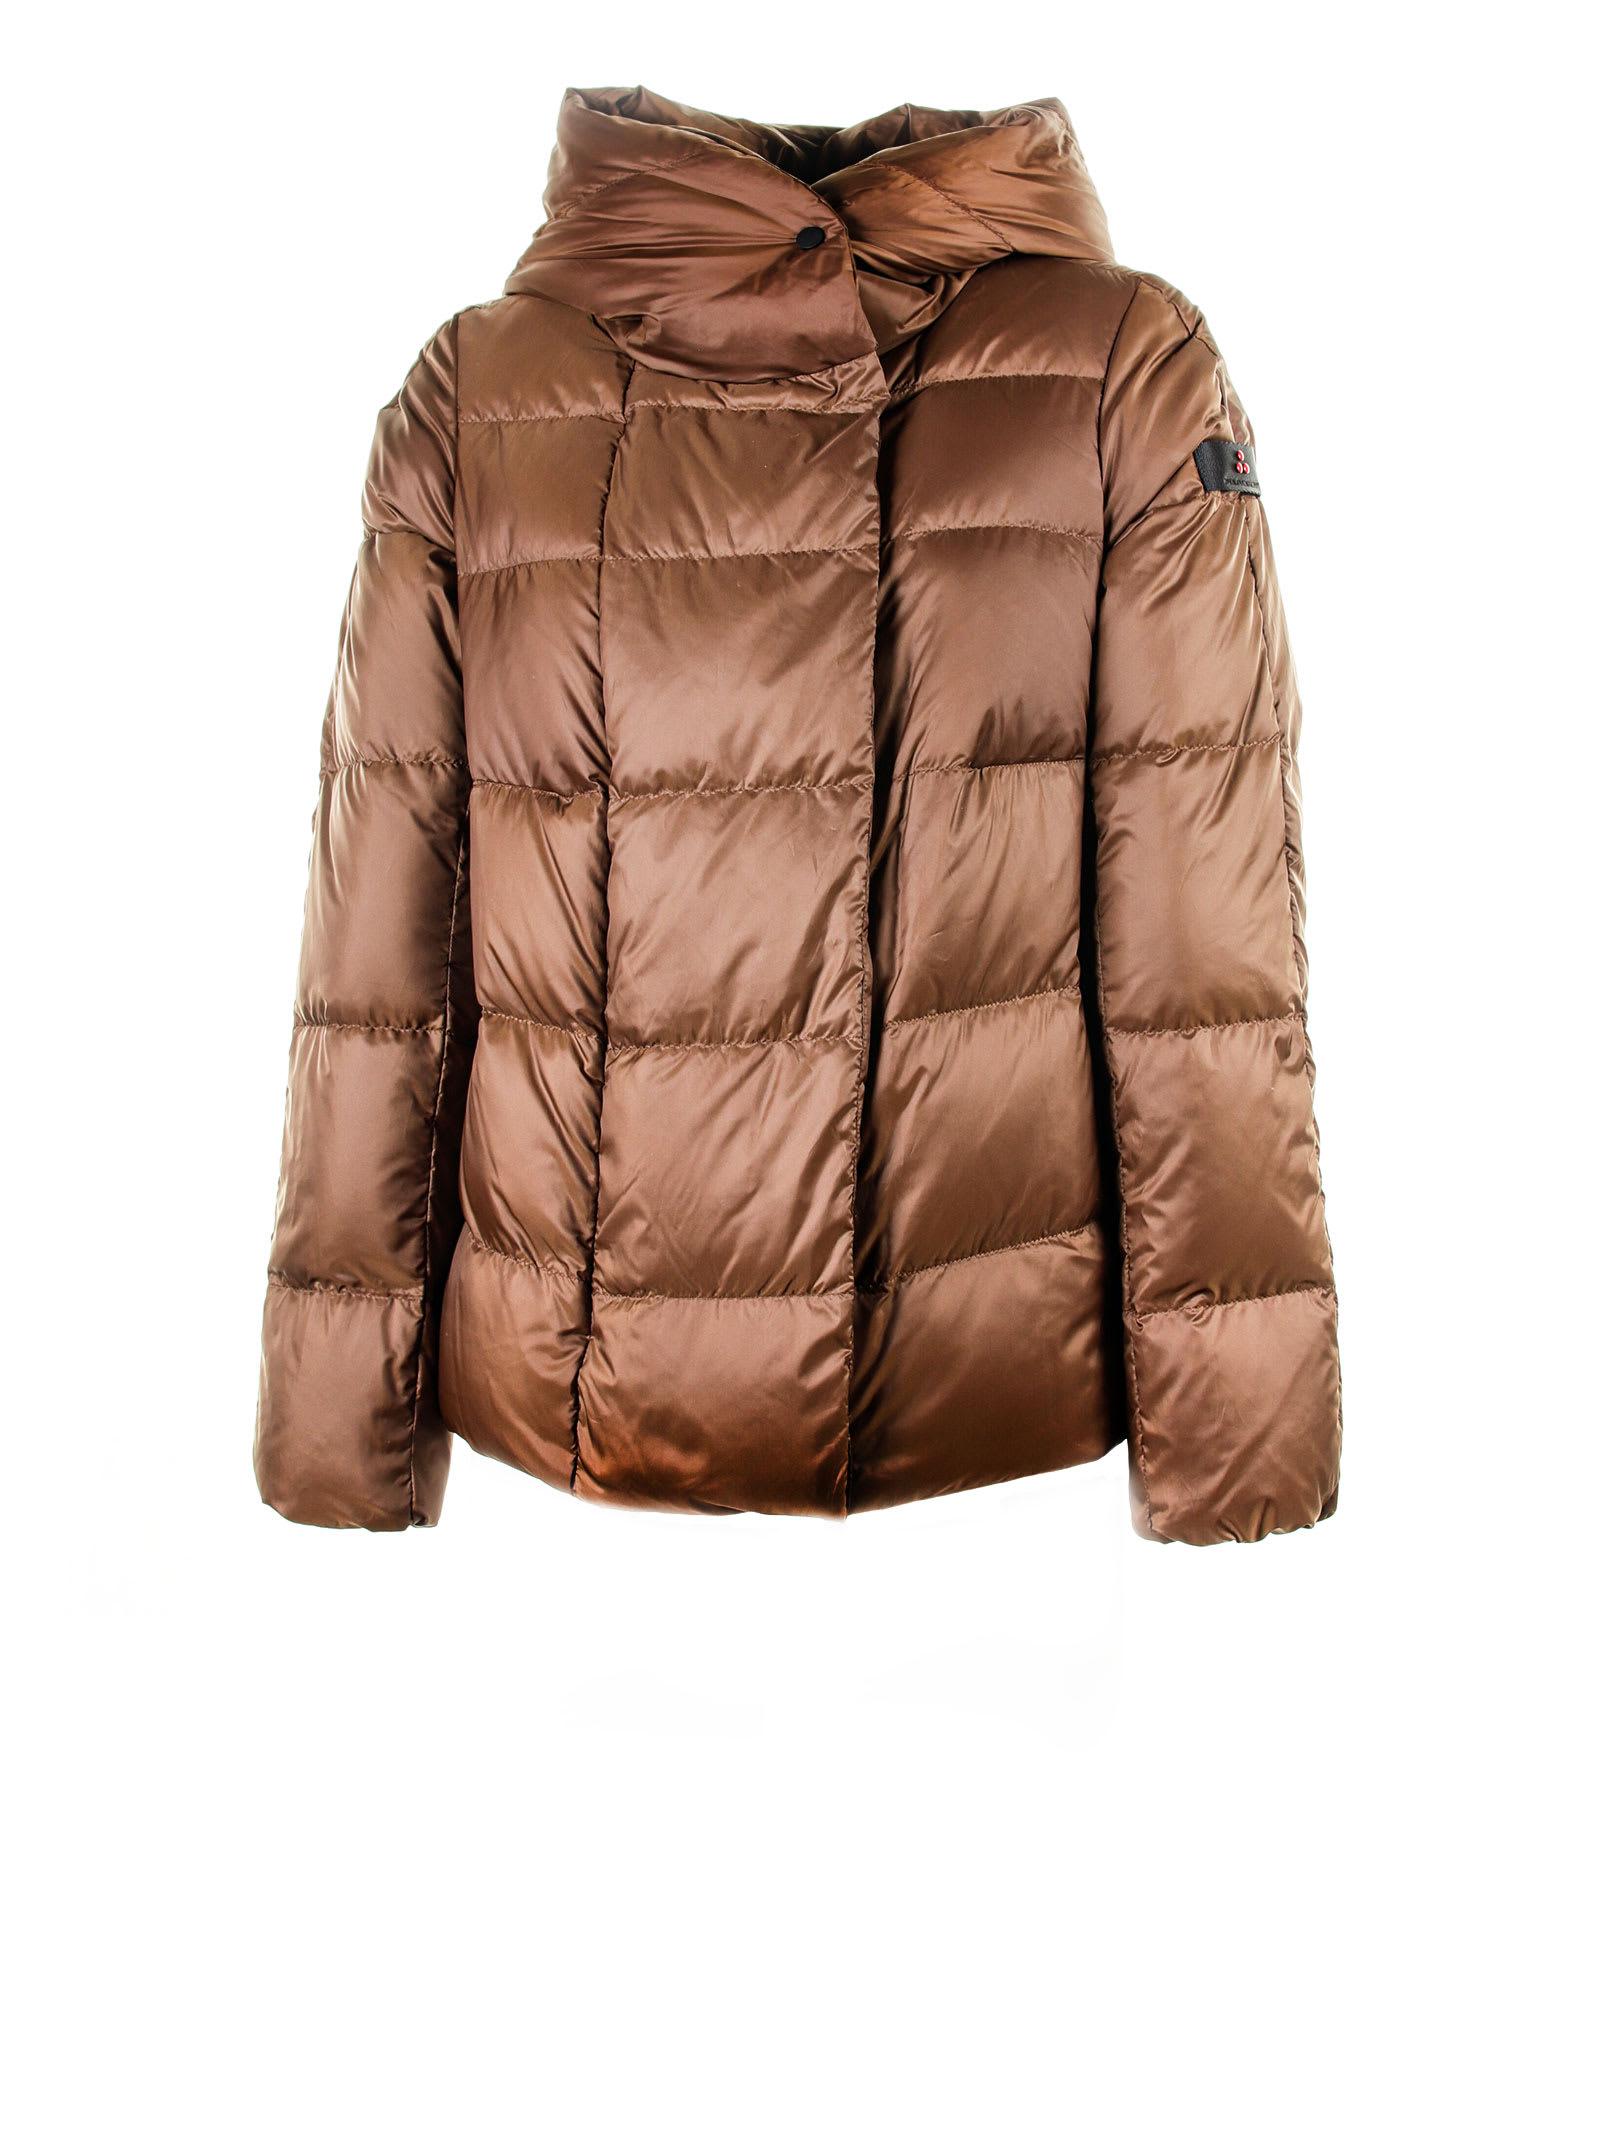 Peuterey Down Jacket In Super Light Fabric in Brown | Lyst UK